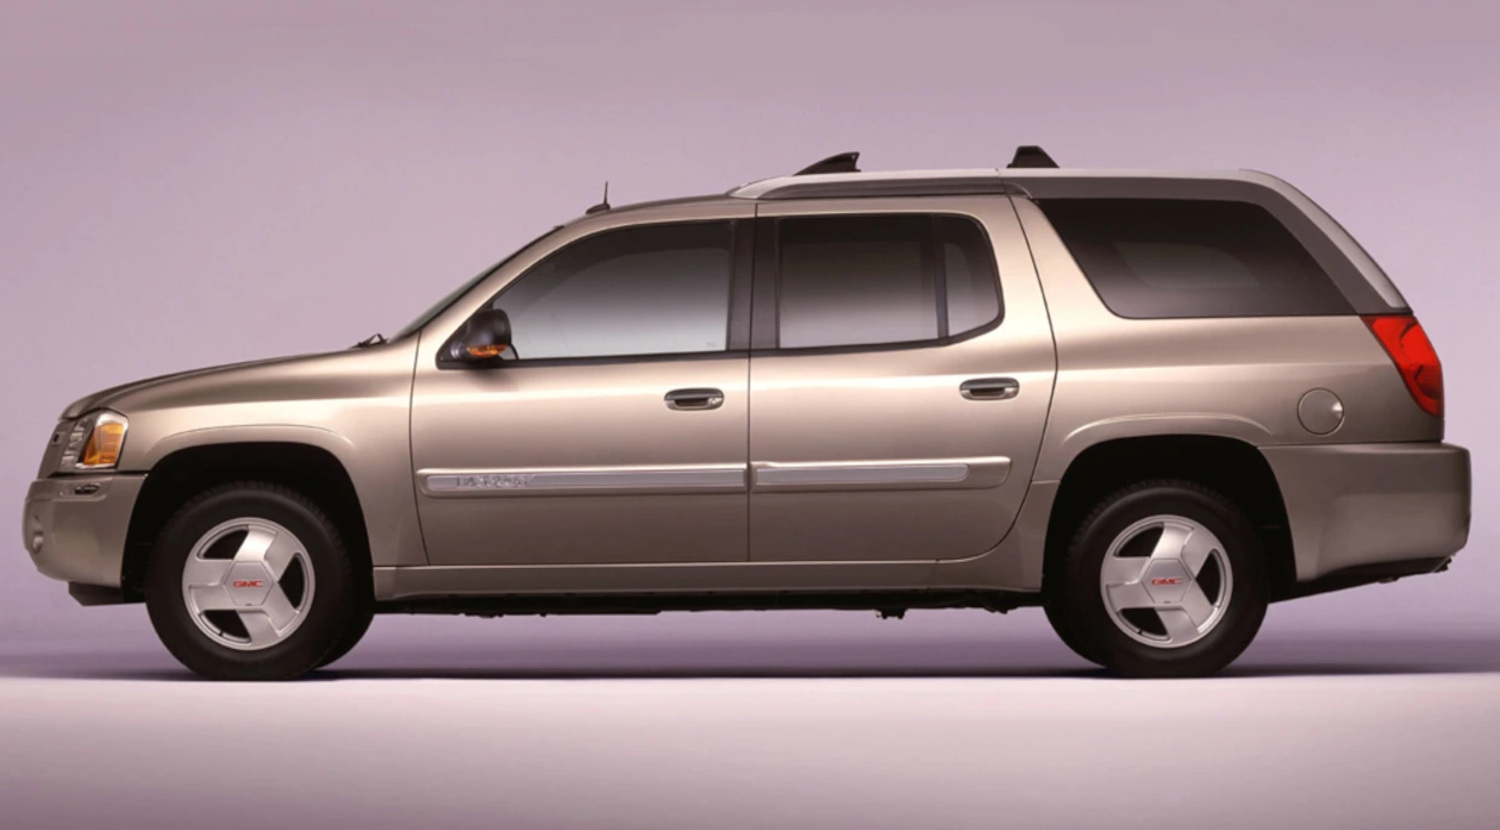 The GMC Envoy XUV seen here was part SUV, part truck